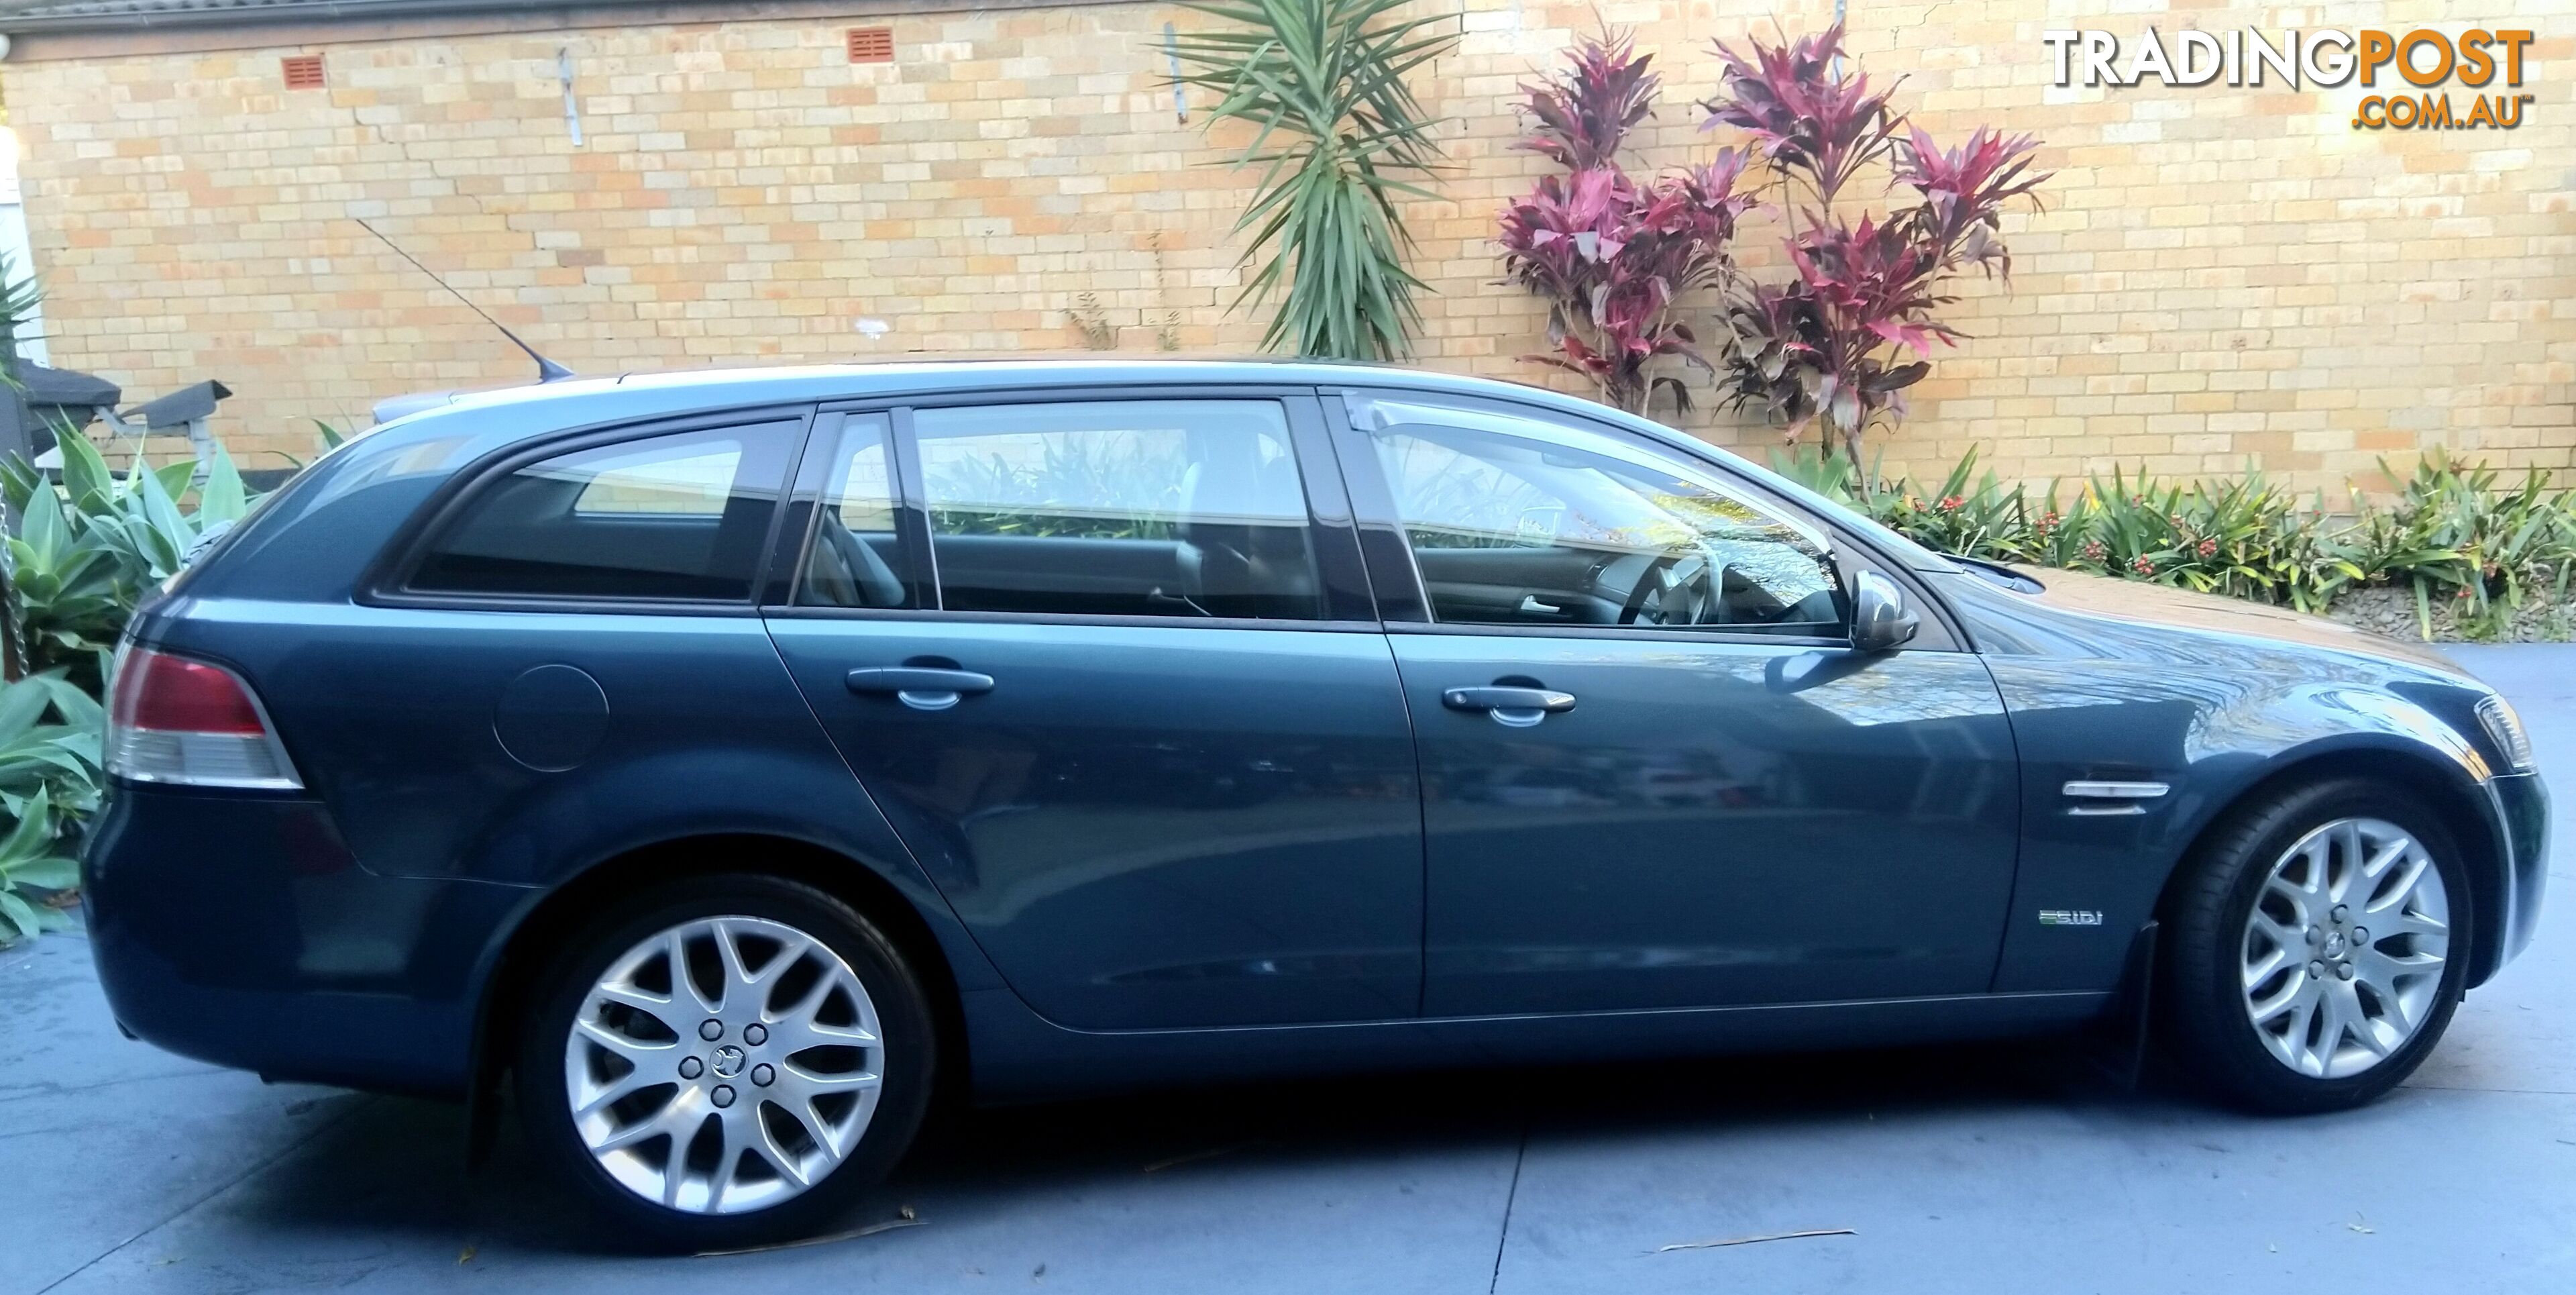 2010 Holden Commodore VE MY10 INTERNATIONAL Wagon Automatic